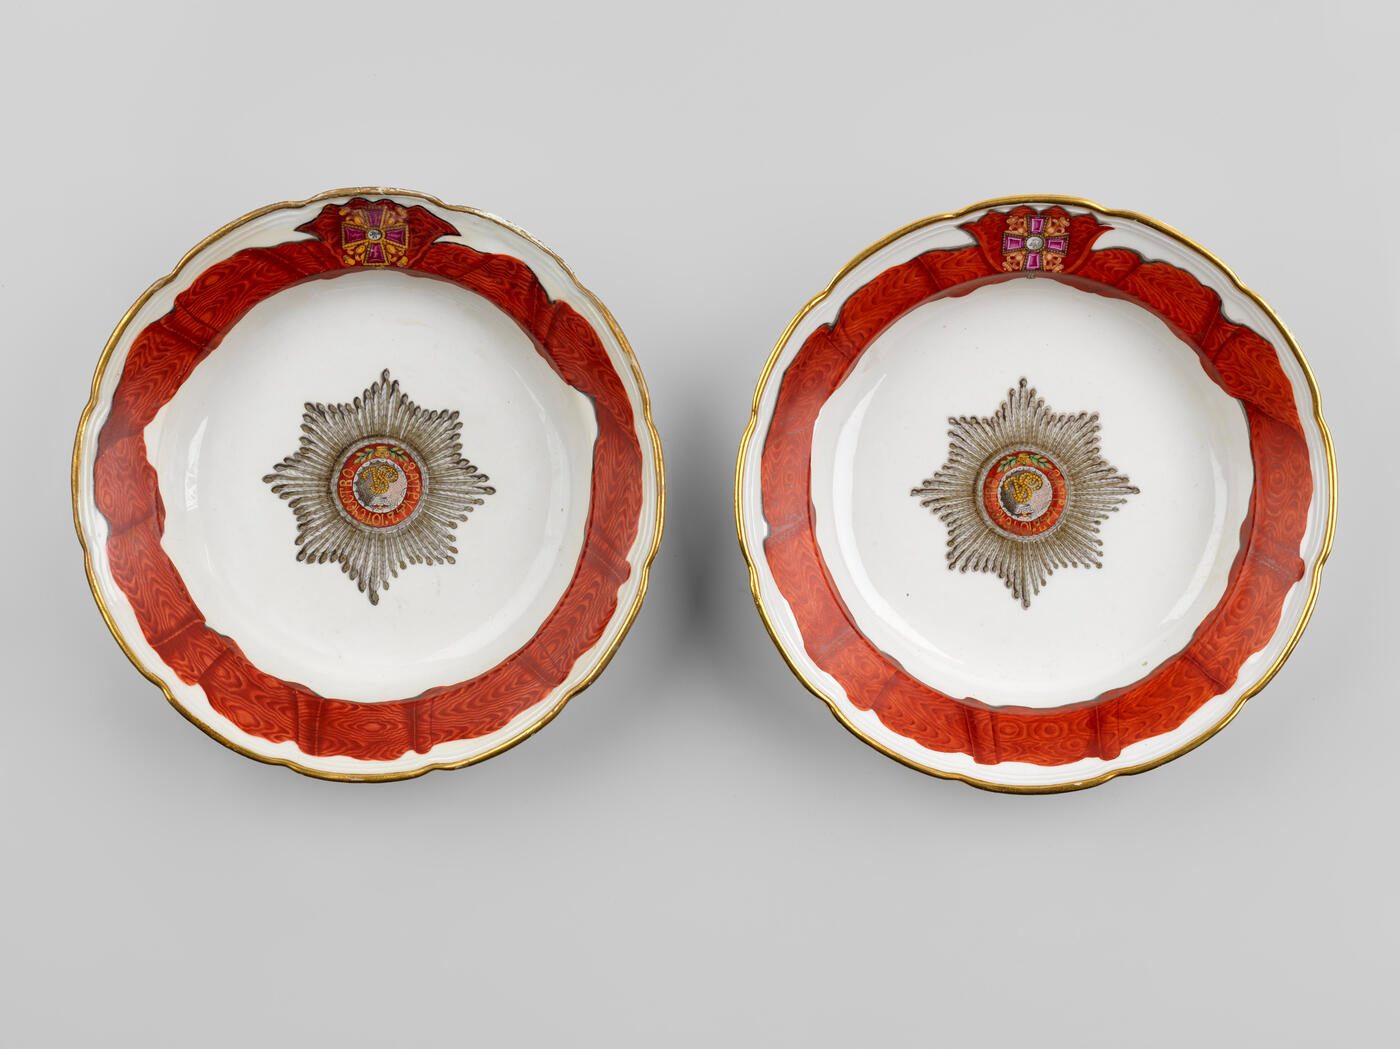 A Porcelain Soup Plate from the Imperial Order of St Alexander Nevsky Service